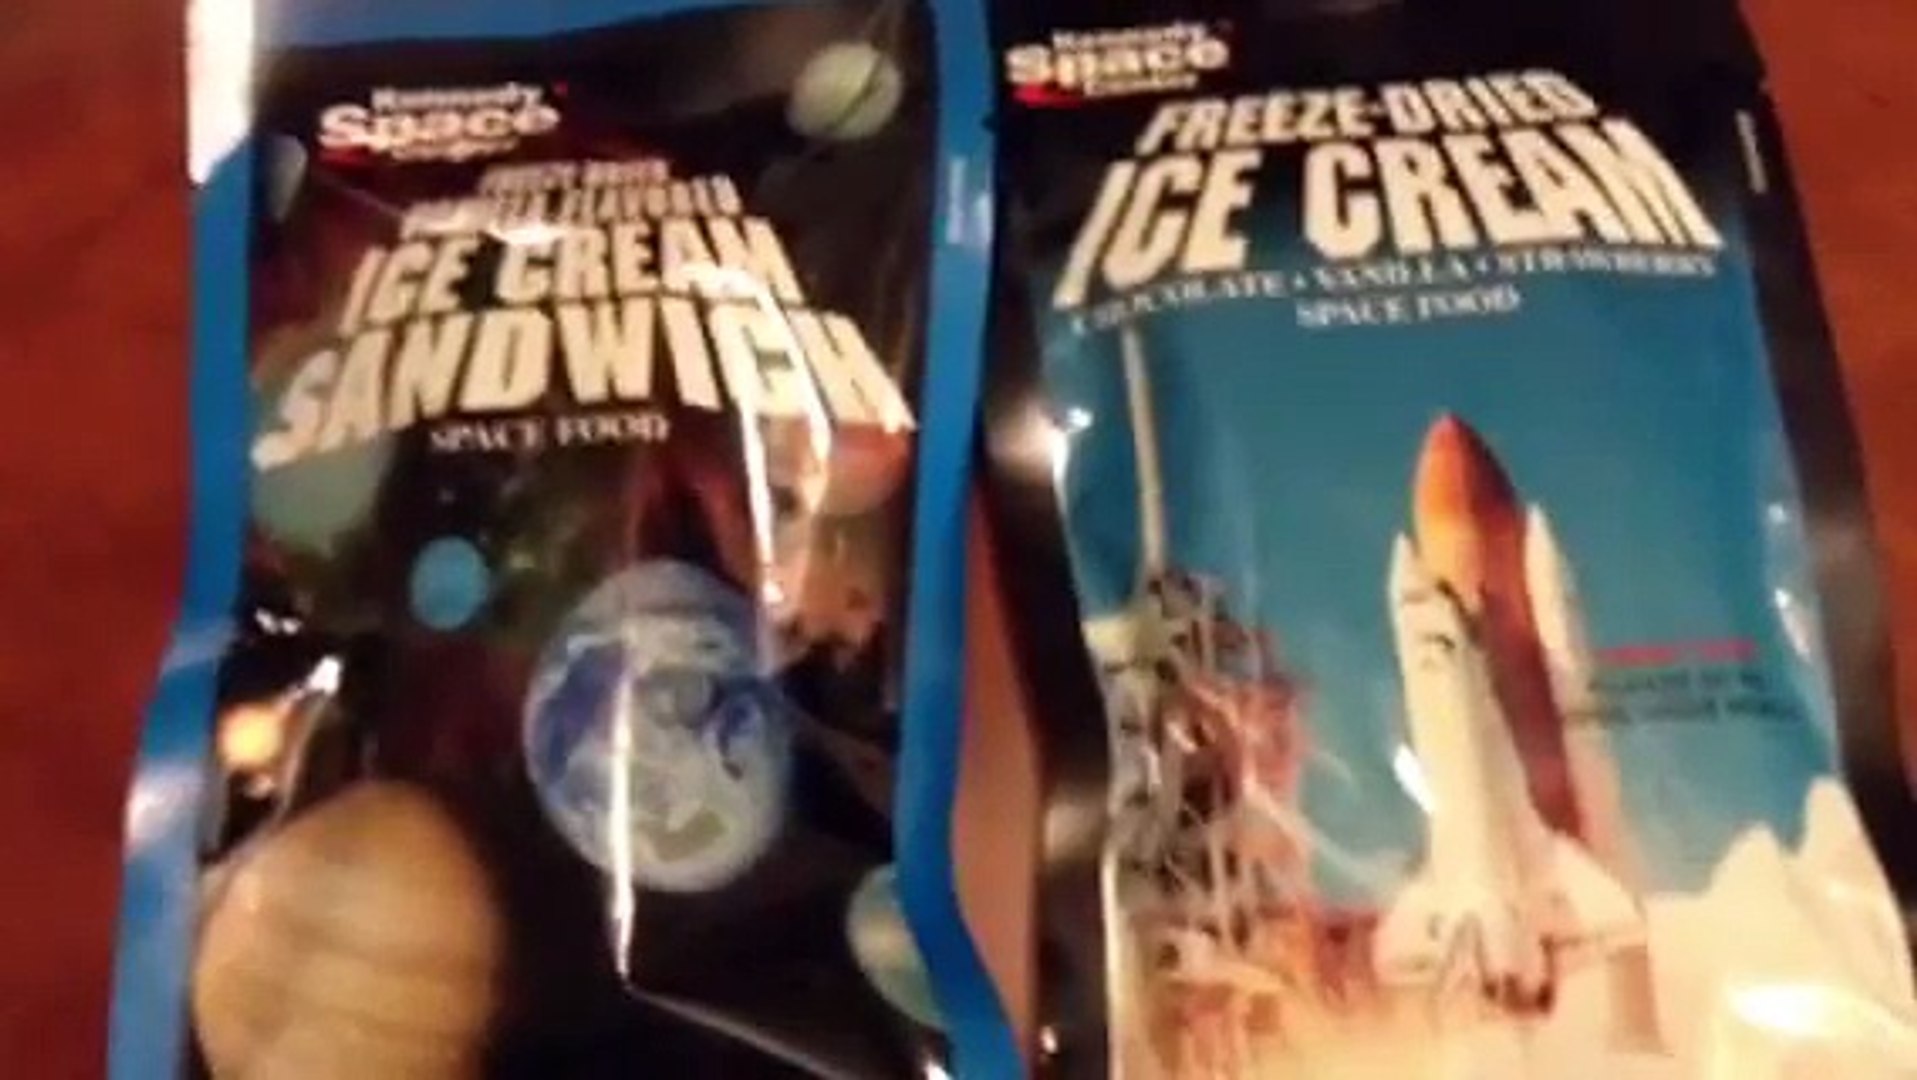 Space food in Orlando!!! Space Kennedy Station